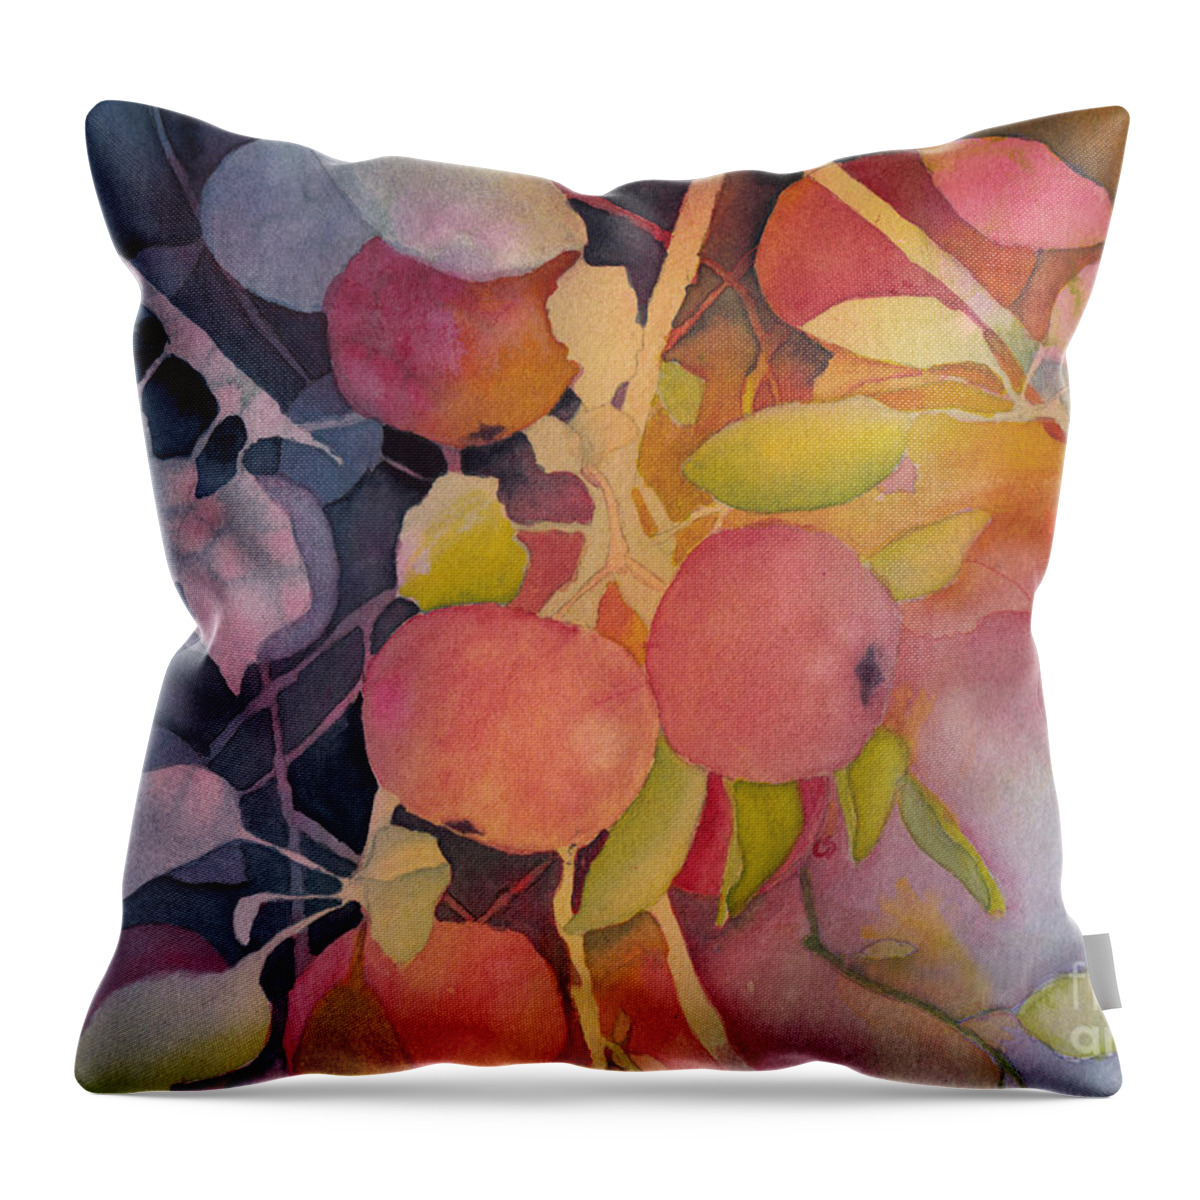 Apples Throw Pillow featuring the painting Autumn Apples by Conni Schaftenaar